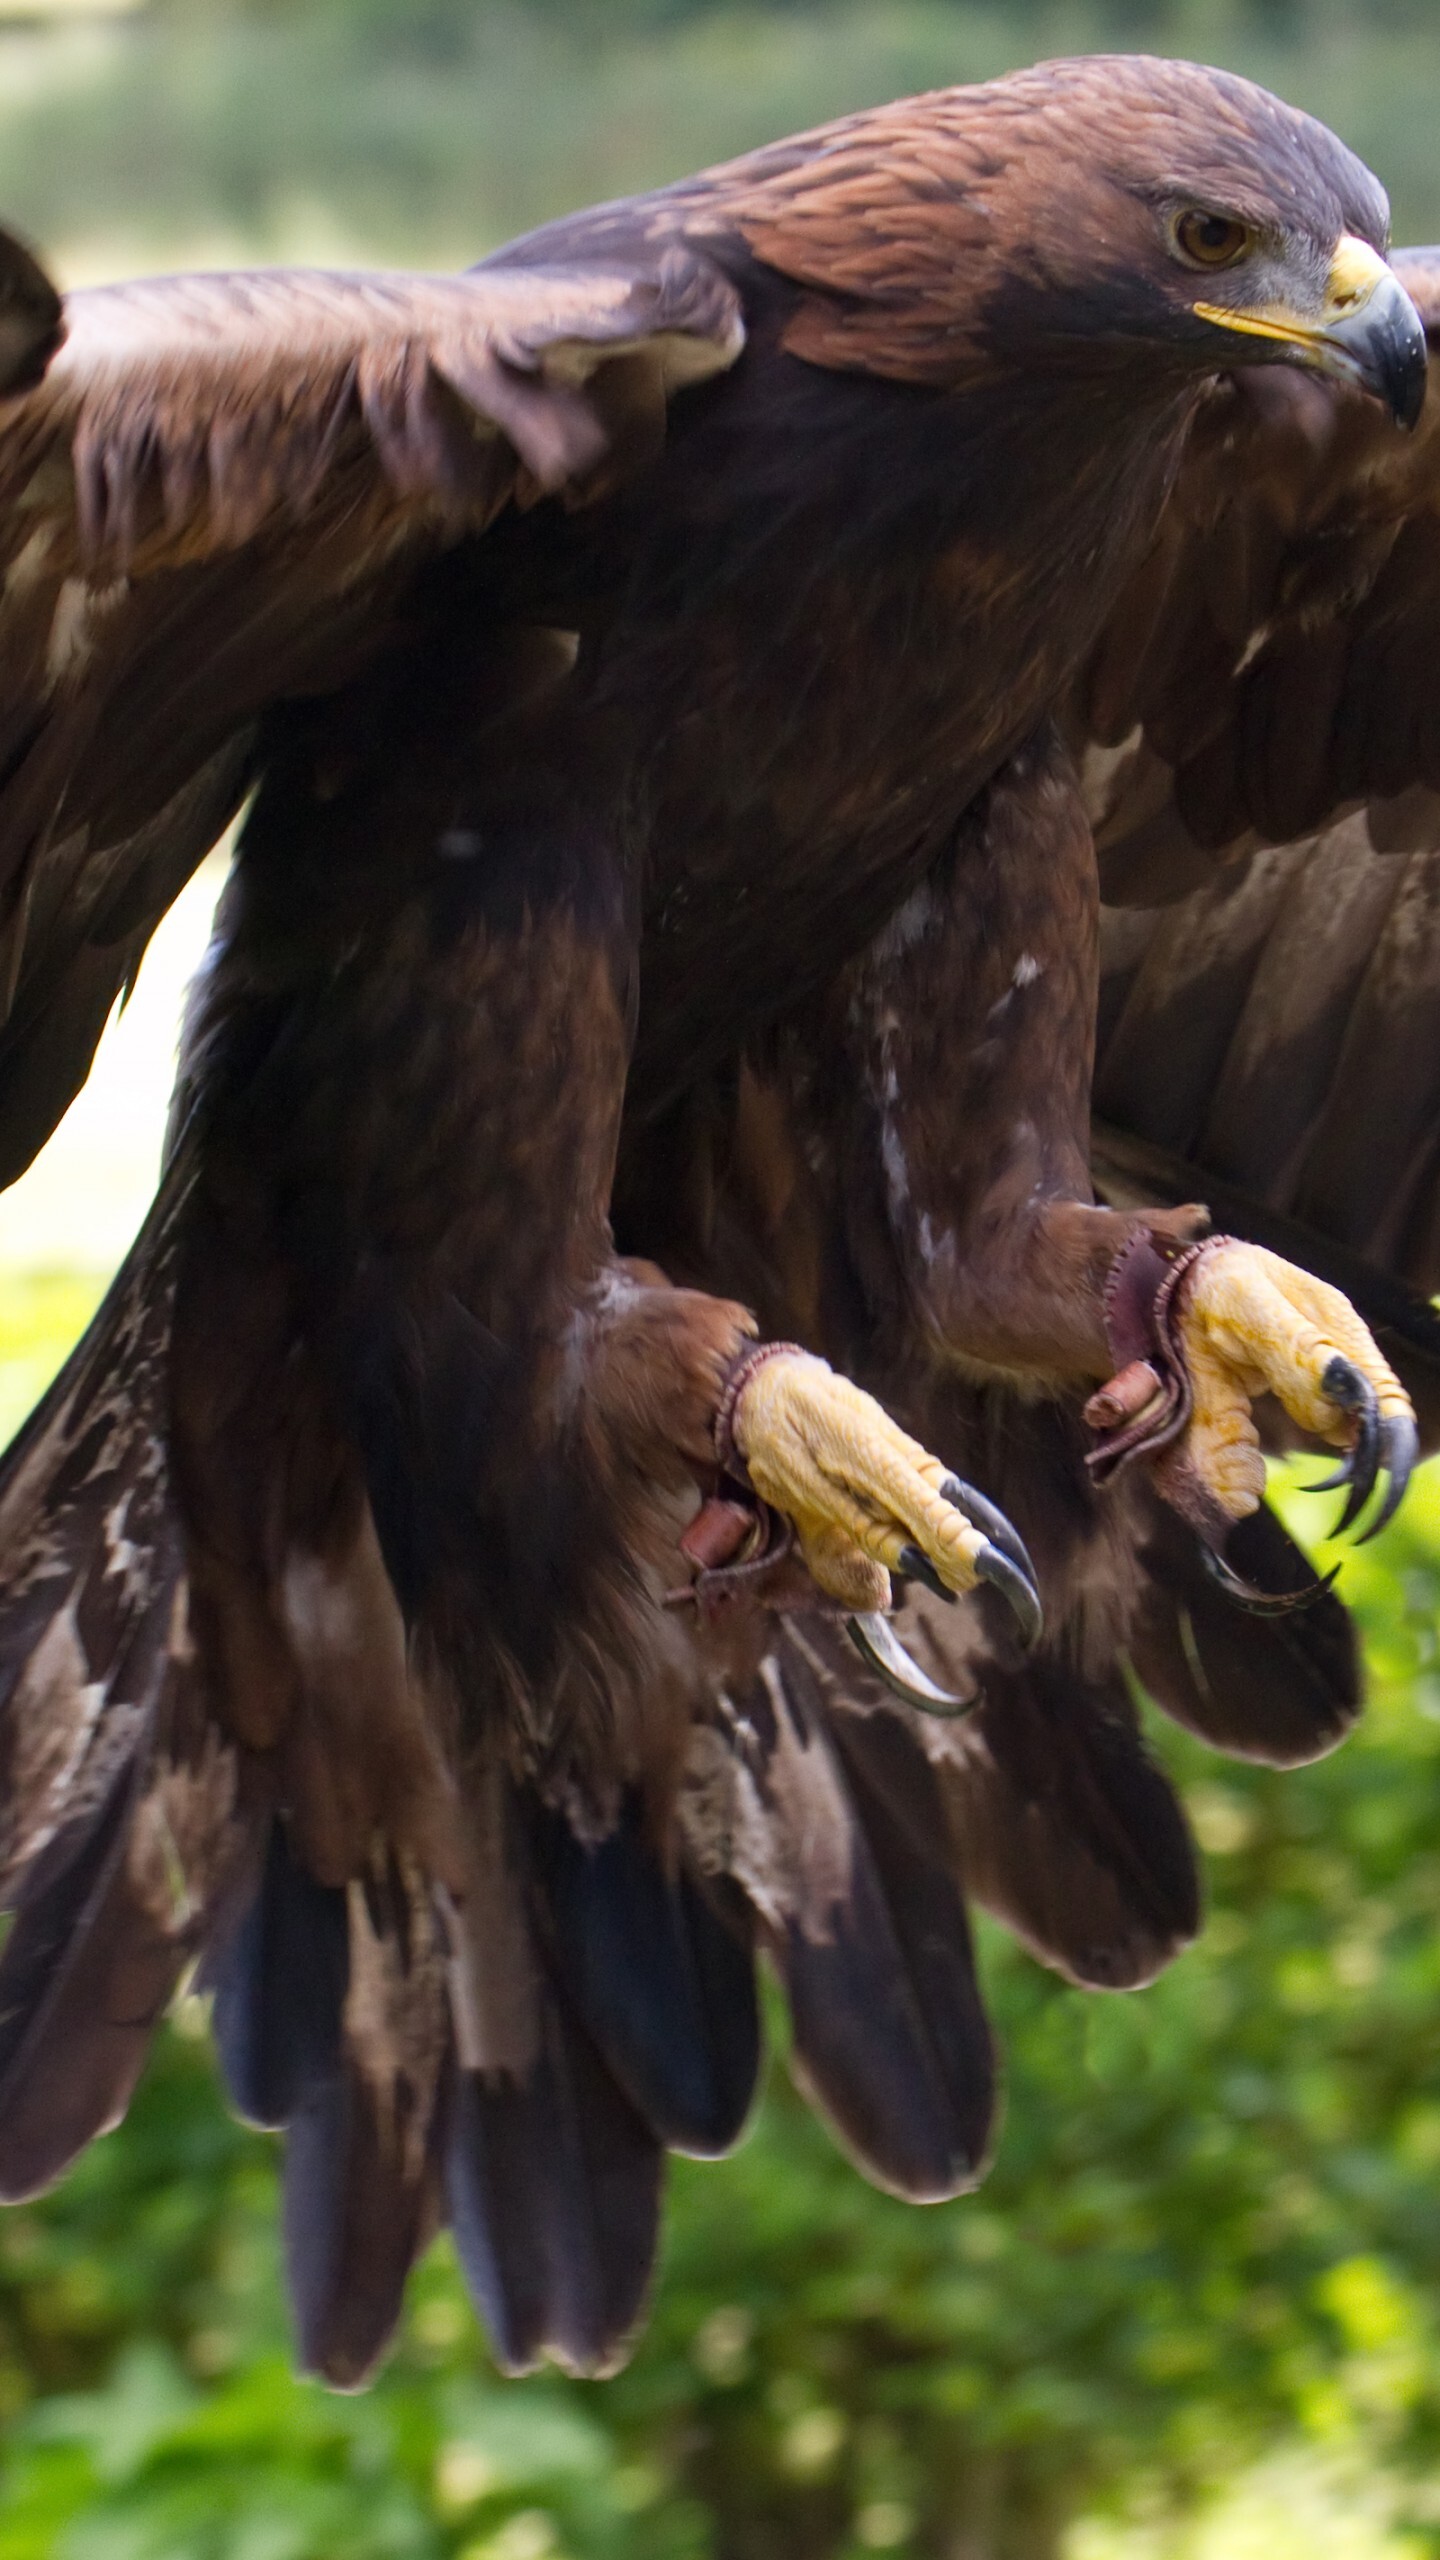 Golden Eagle: The foot and talons, Part of the claw on the eagle's foot, A very large raptor. 1440x2560 HD Wallpaper.